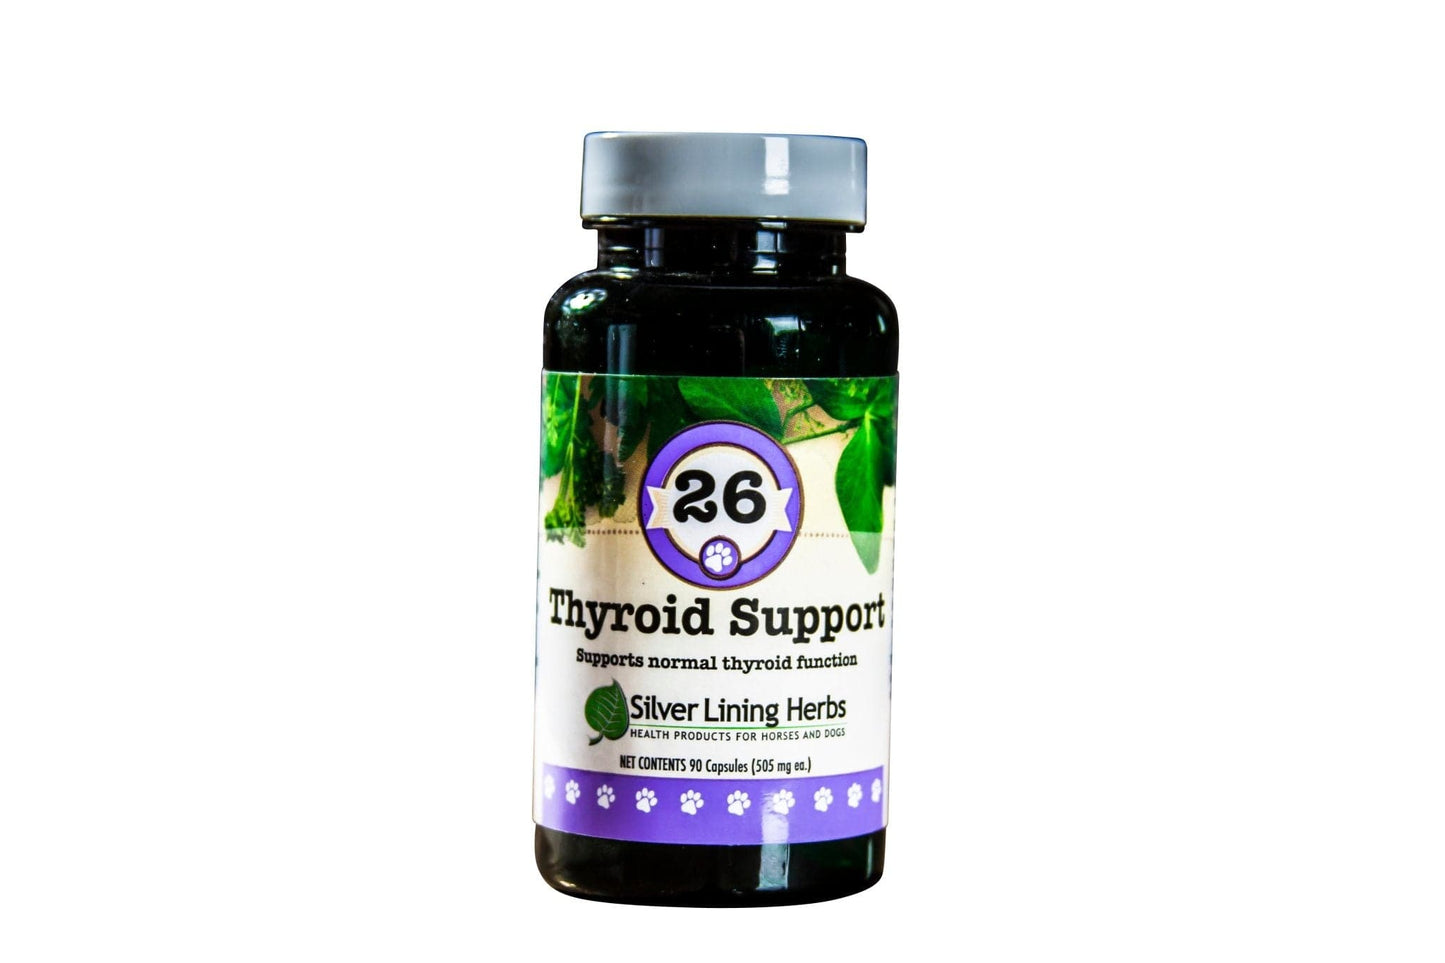 A bottle of #26 Thyroid Support for Dogs, an herbal supplement from Silver Lining Herbs